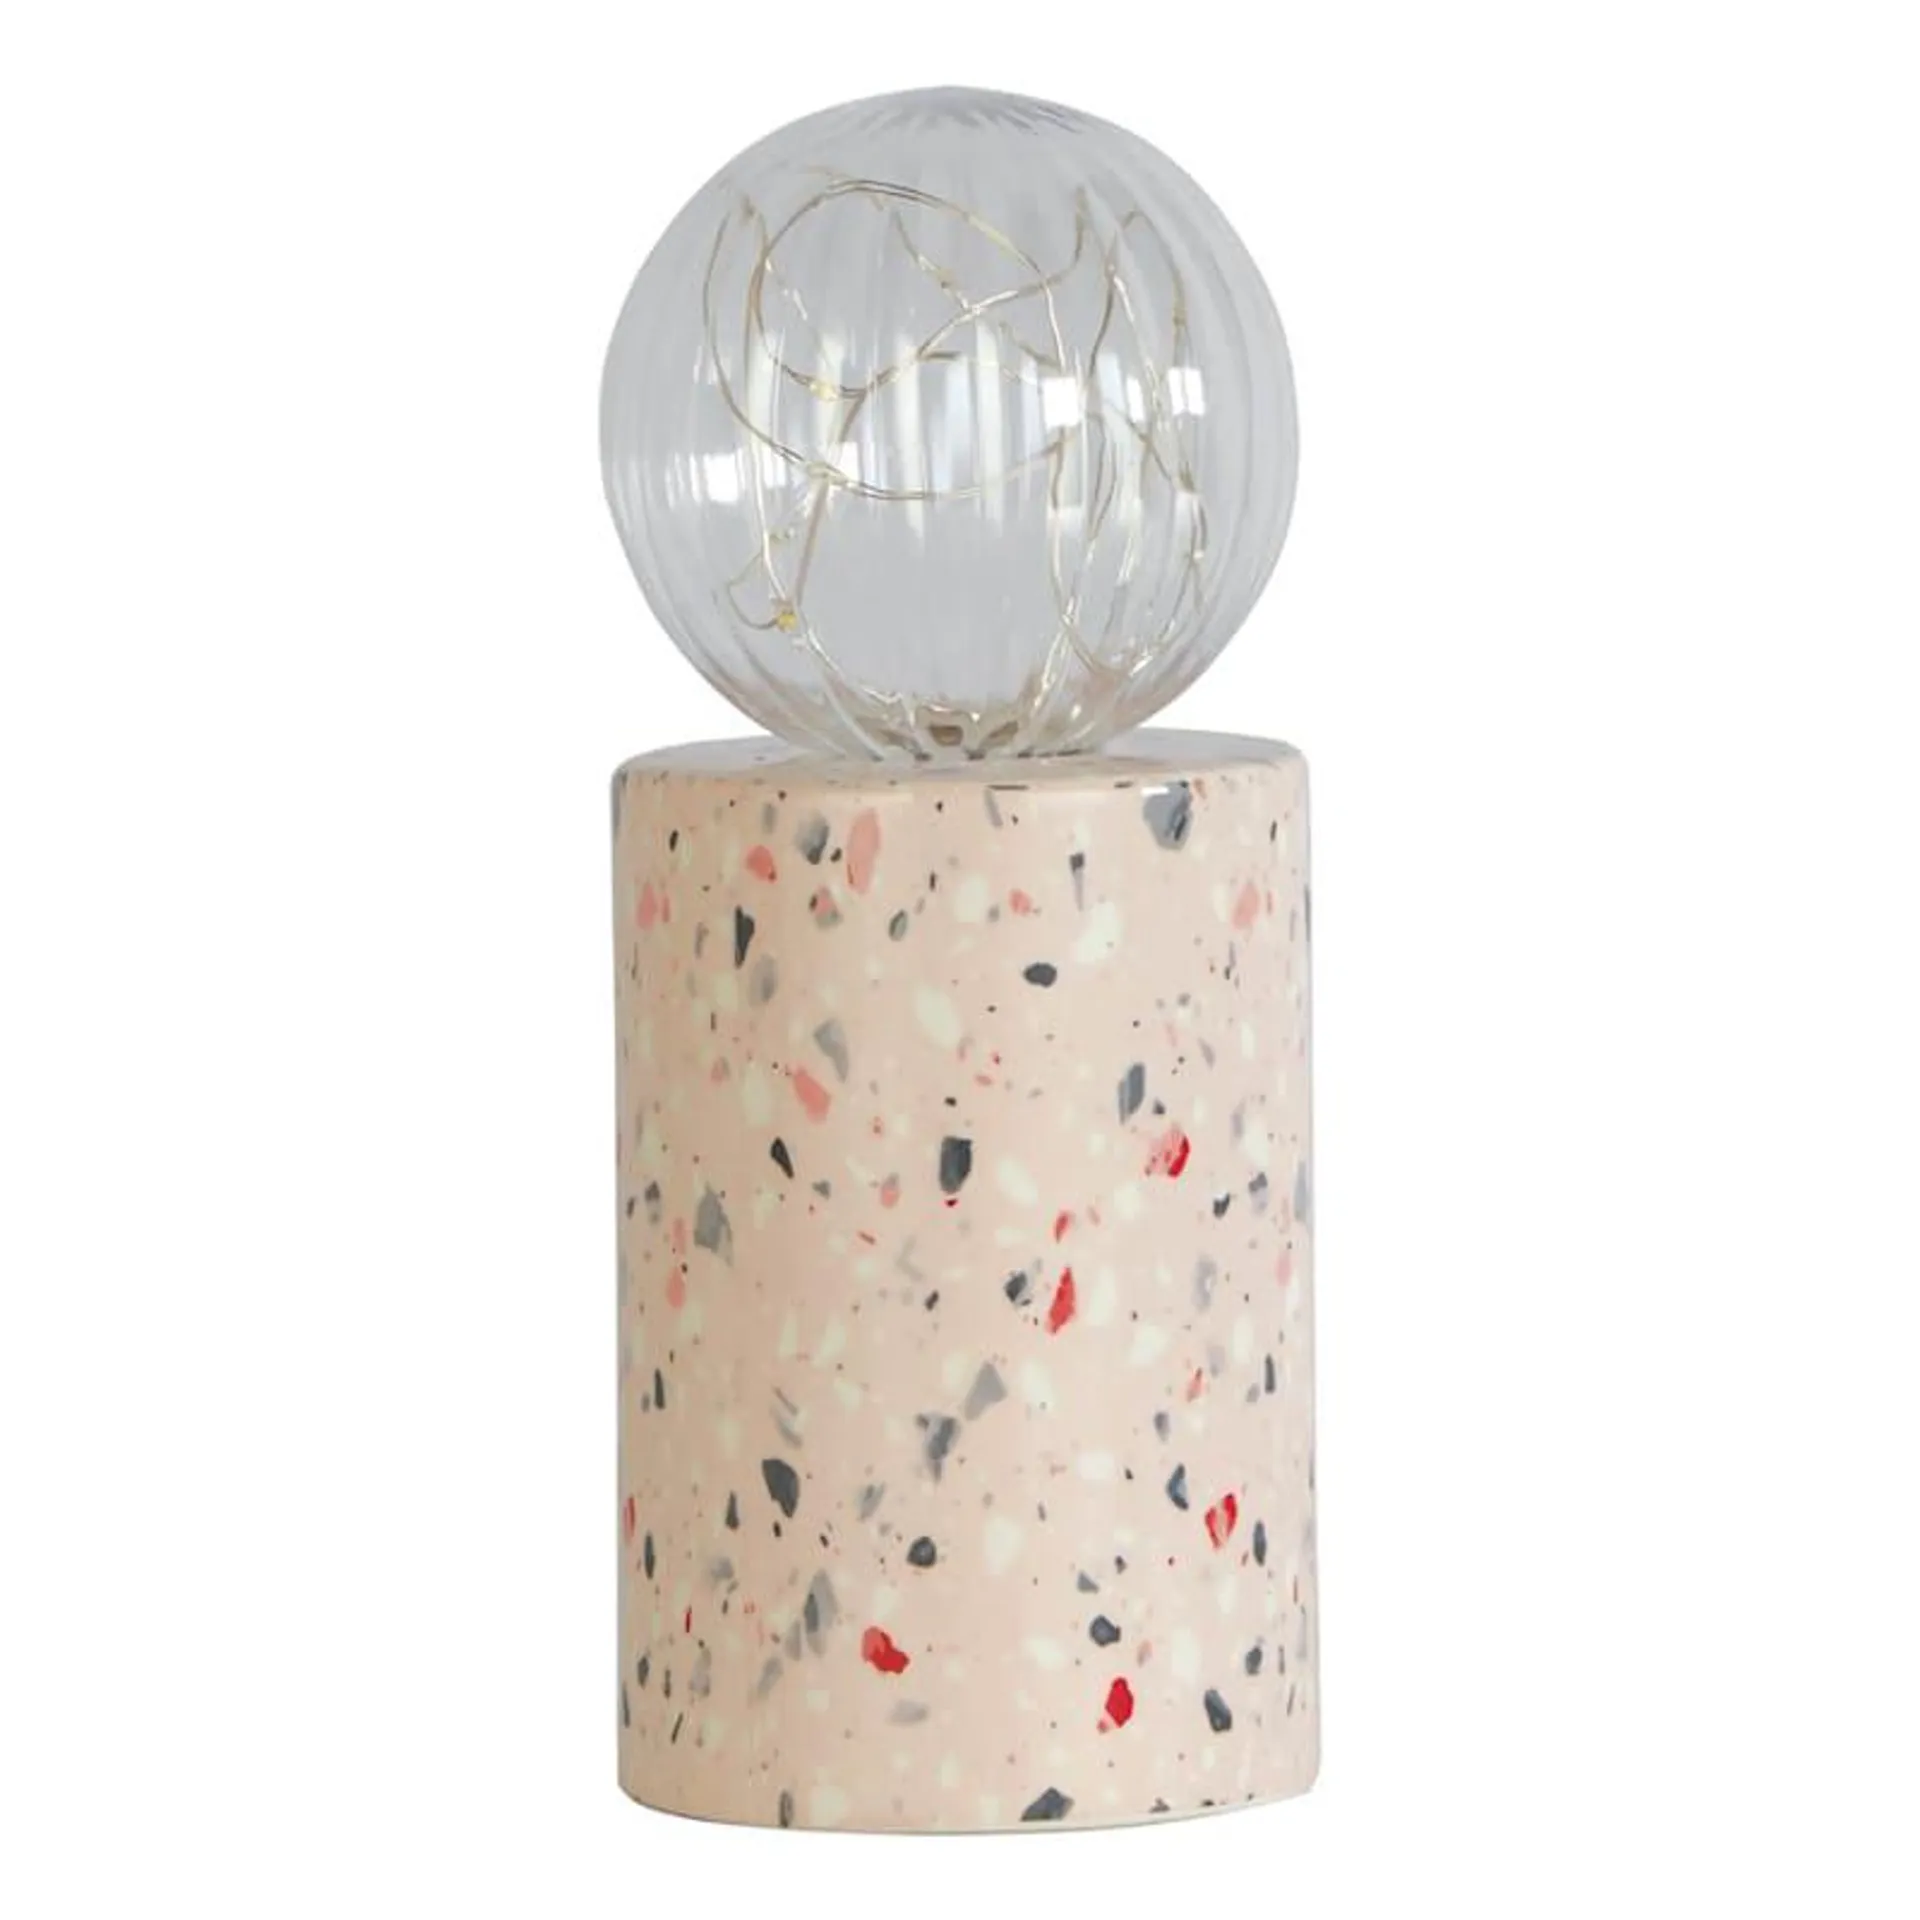 Pink Exposed Bulb Uplight Lamp, 5"